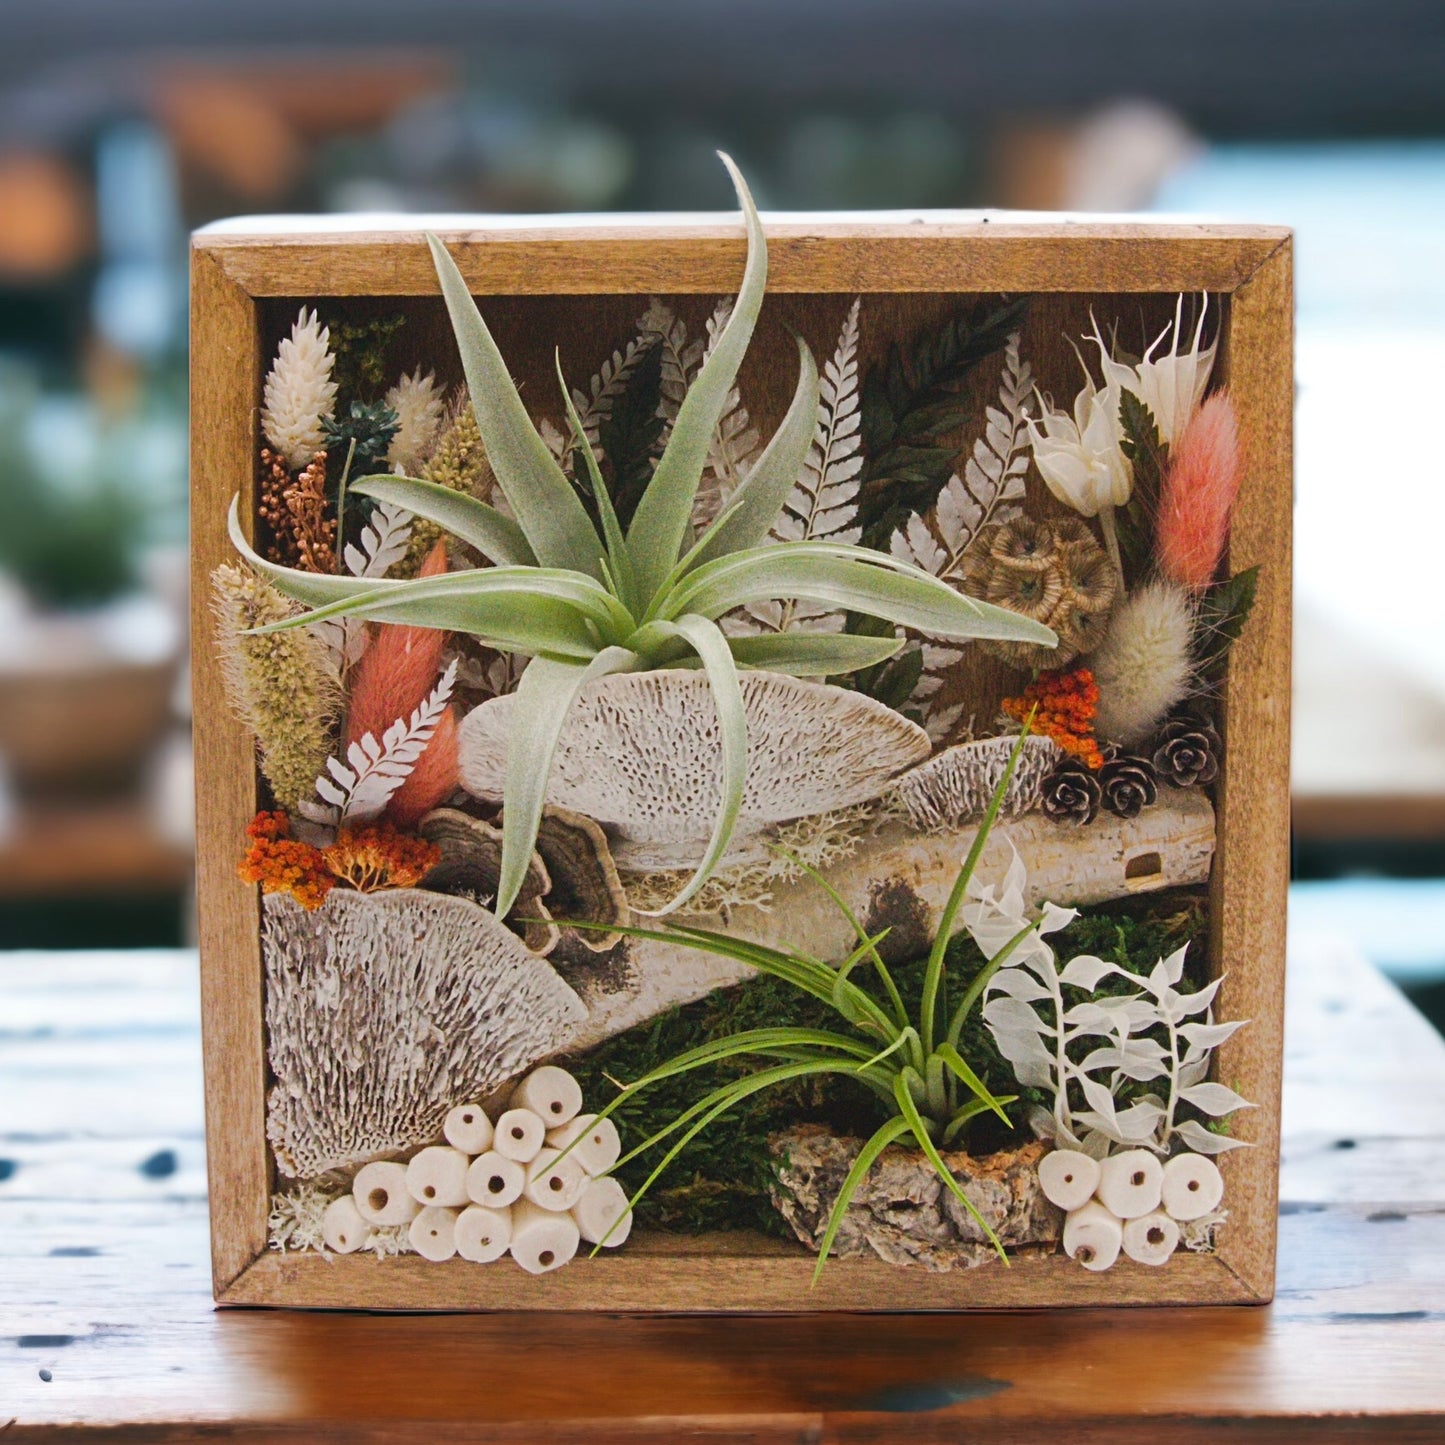 Antique walnut-stained wooden box frame filled with dried flowers, moss, wood, dried mushrooms and two airplants